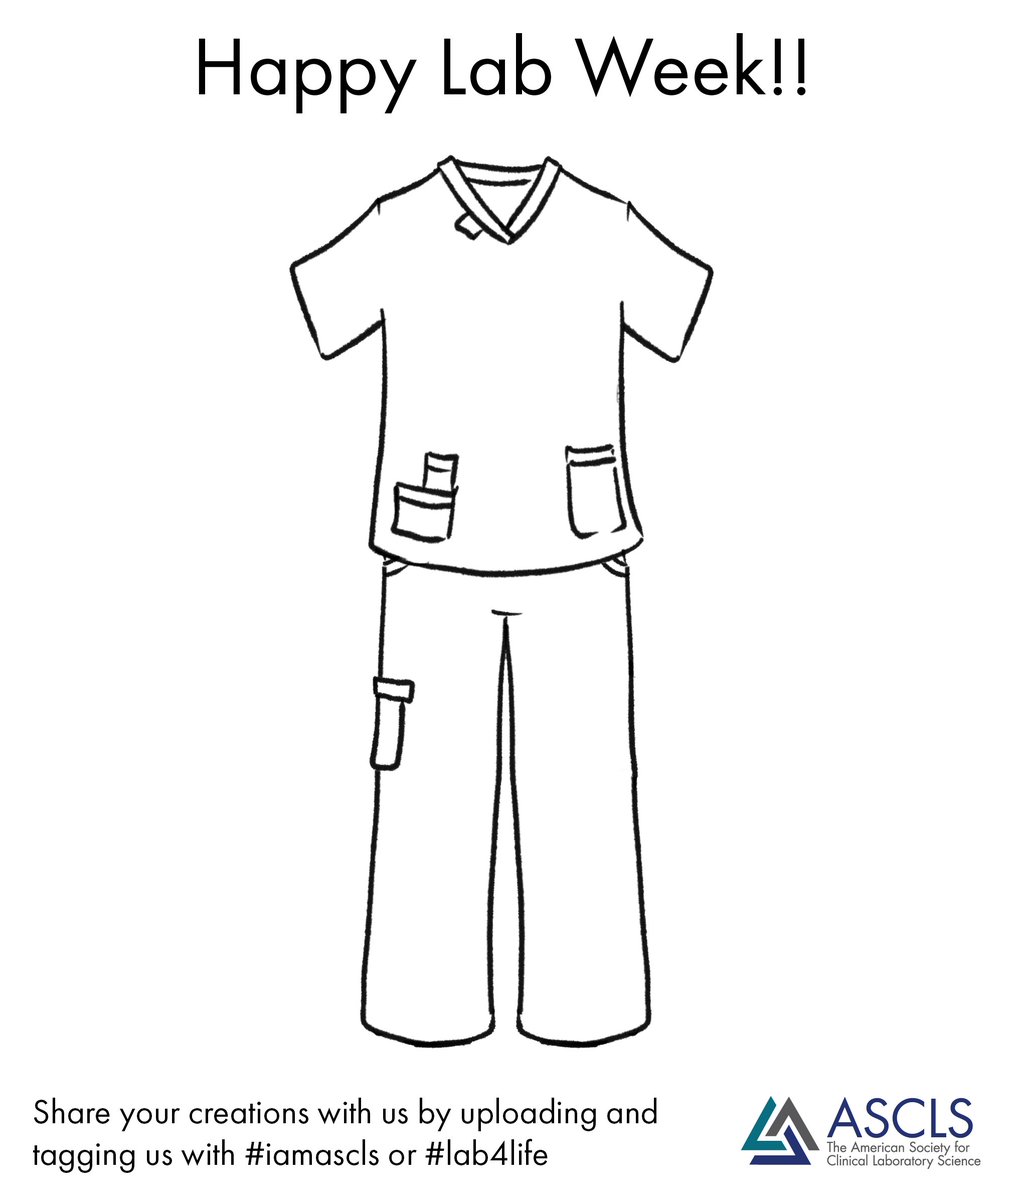 Today's #LabWeek activity invites you to design and share your dream scrubs! Whether creative, practical, or just downright colorful, we want to know how this set is going to set you up for success. Share your finished design and tag #IamASCLS or #Lab4Life.